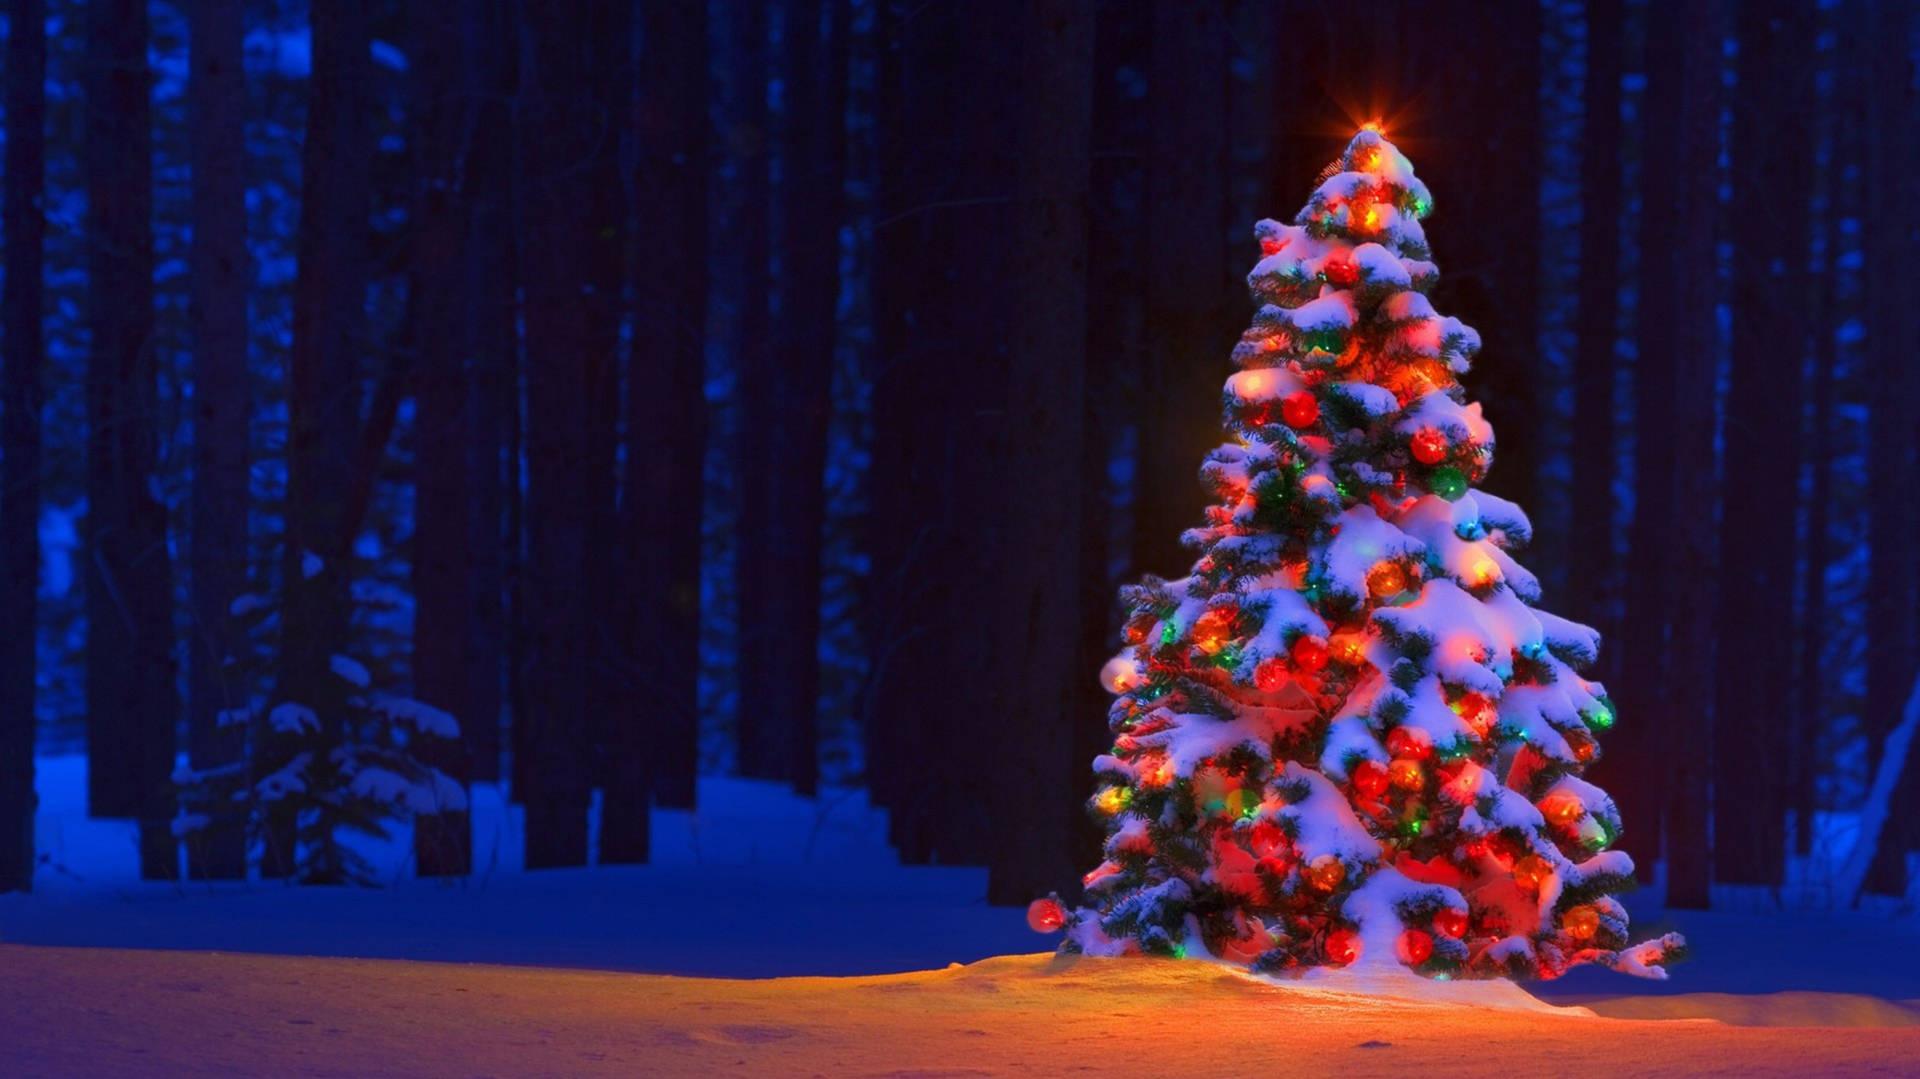 Download 4K Ultra HD Christmas Tree Forest Wallpaper